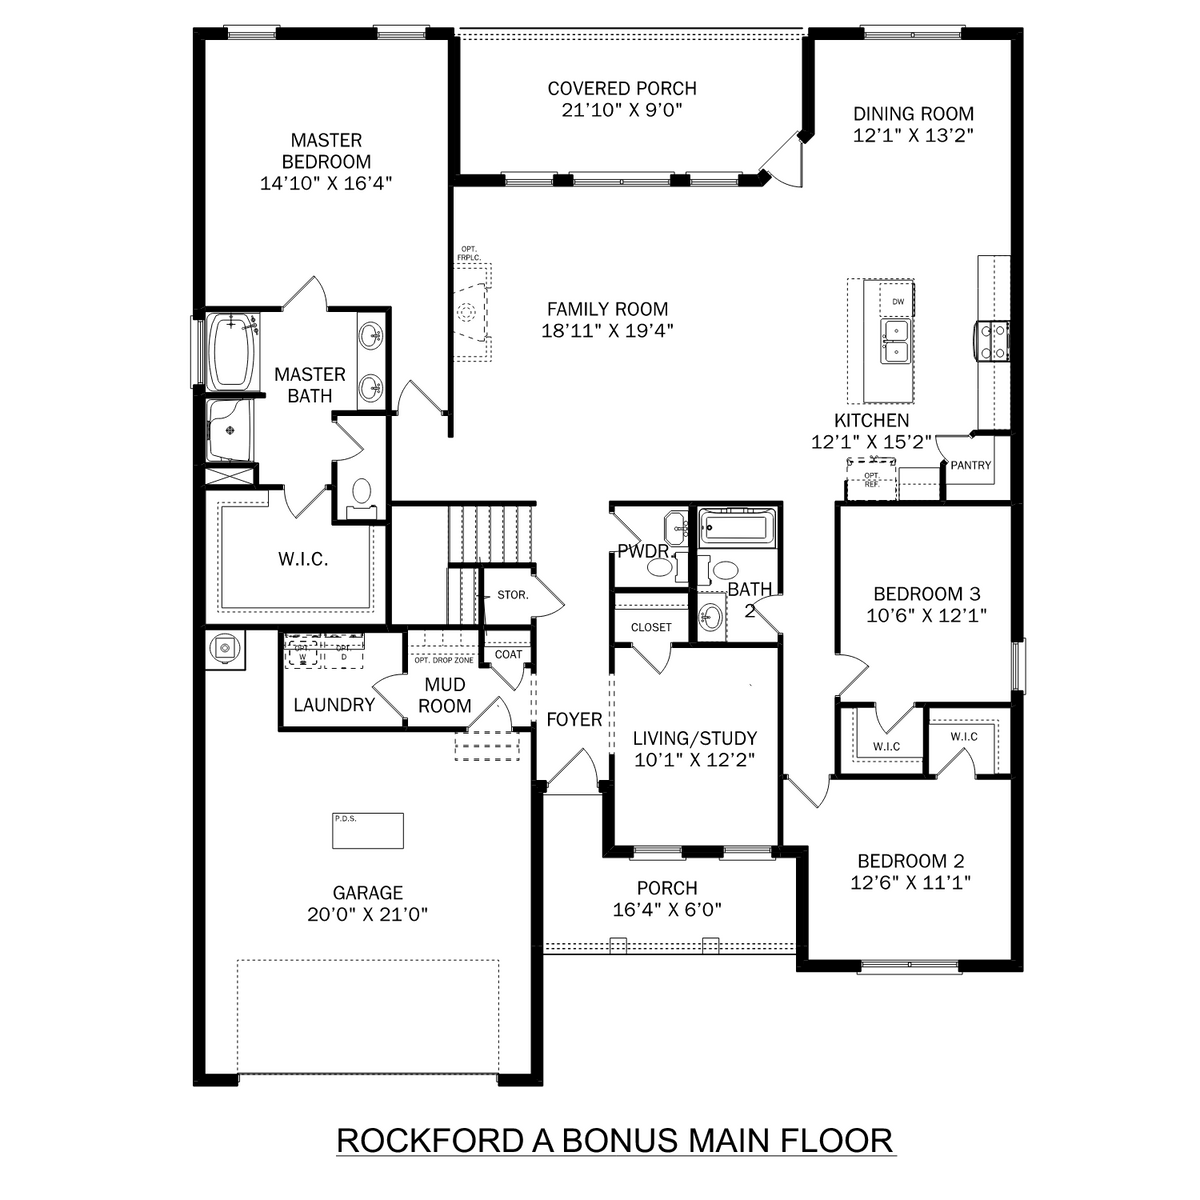 1 - The Rockford with Bonus floor plan layout for 111 Scout Drive in Davidson Homes' Barnett's Crossing community.